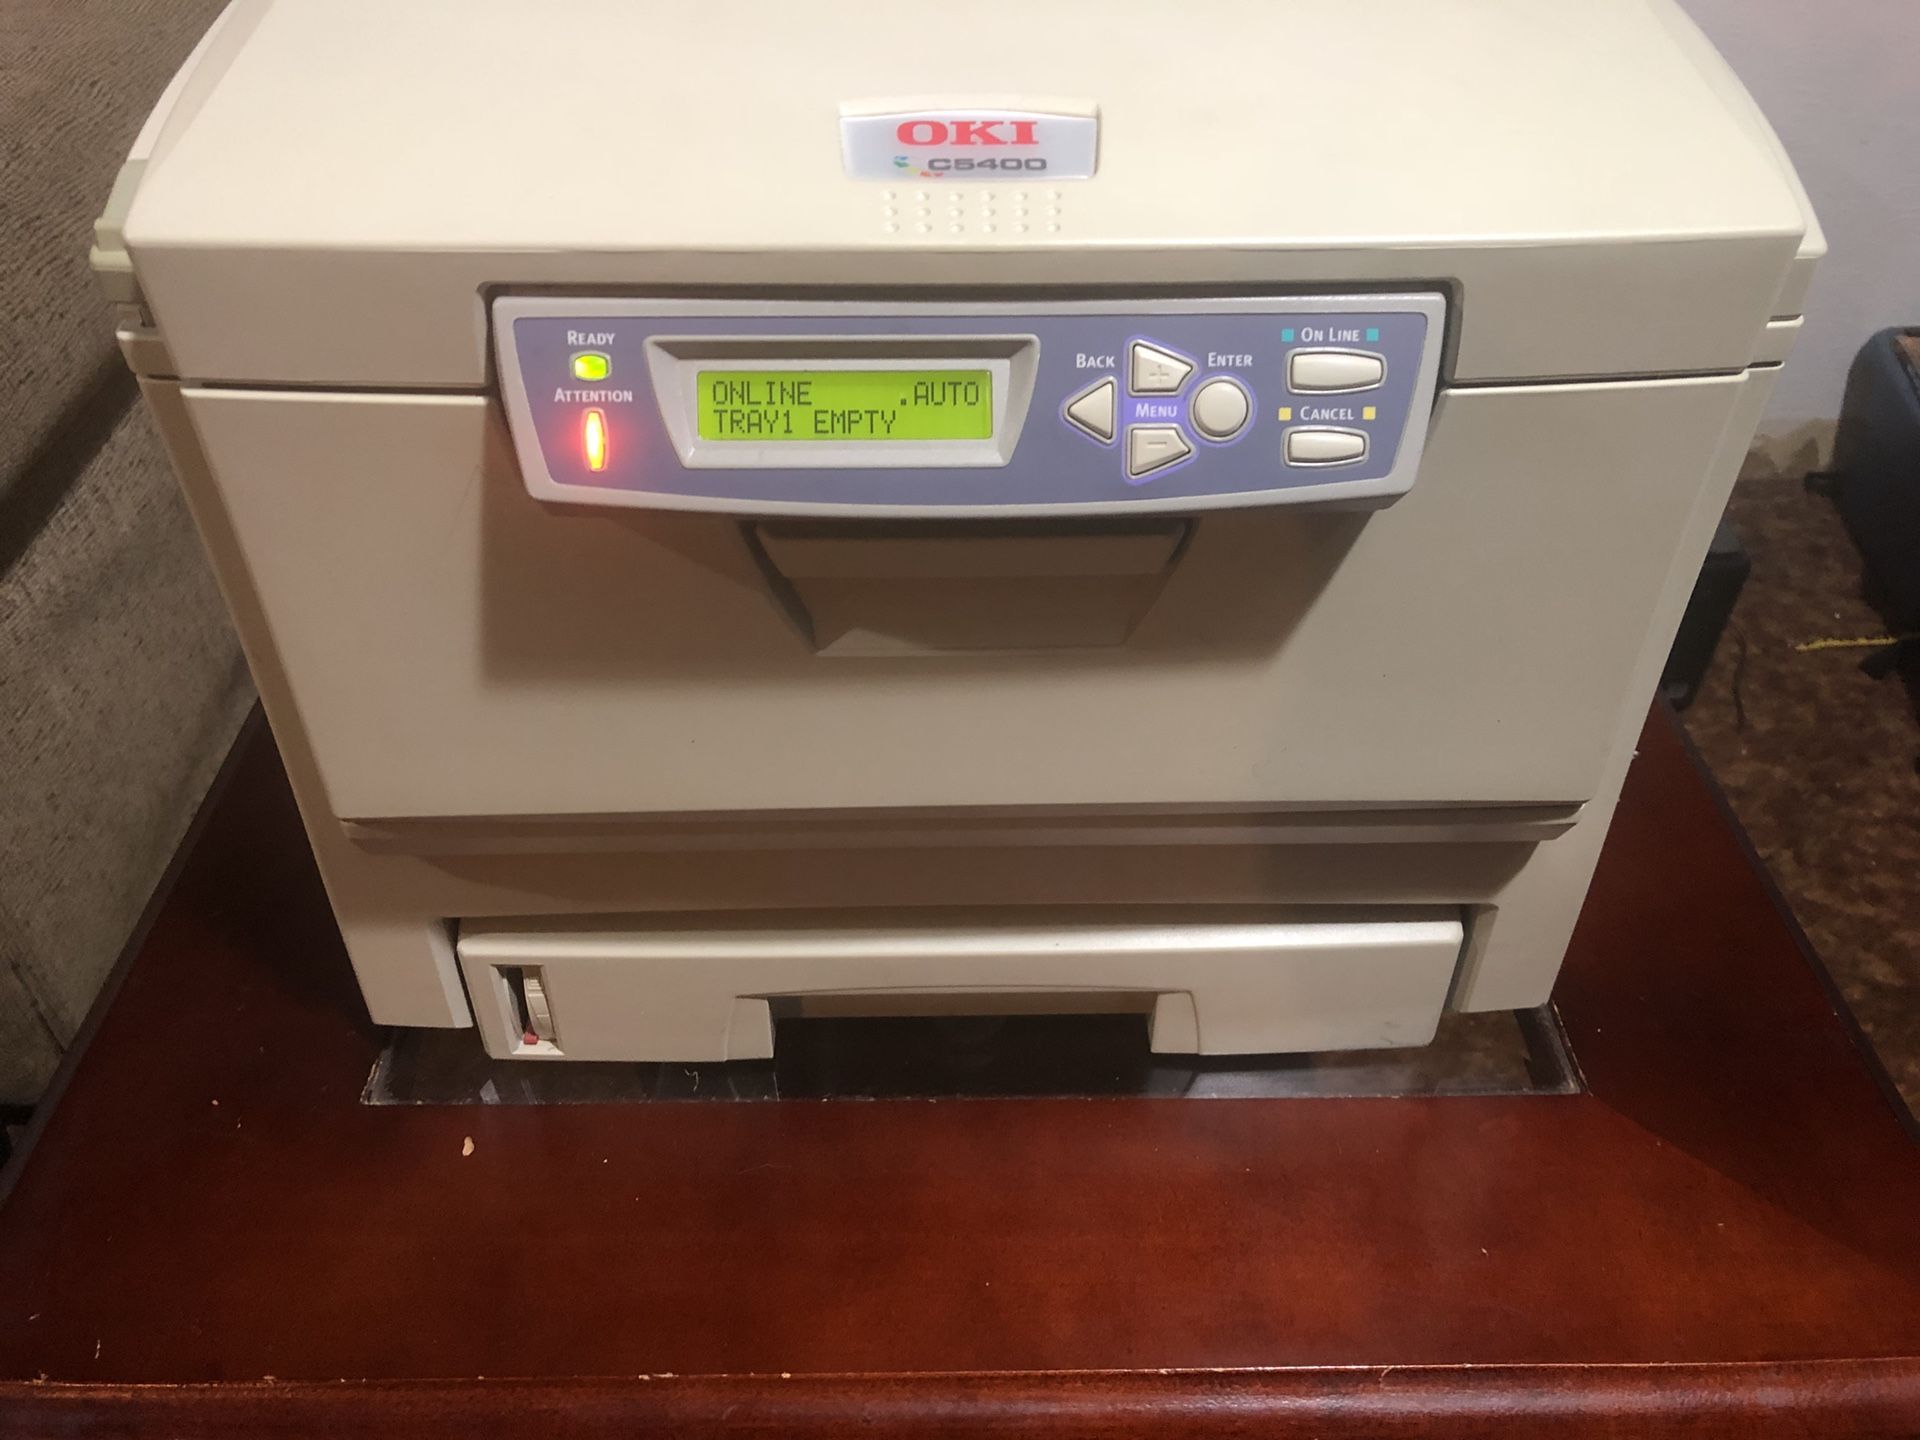 OKI c5400 printer with ink red/blue,yellow